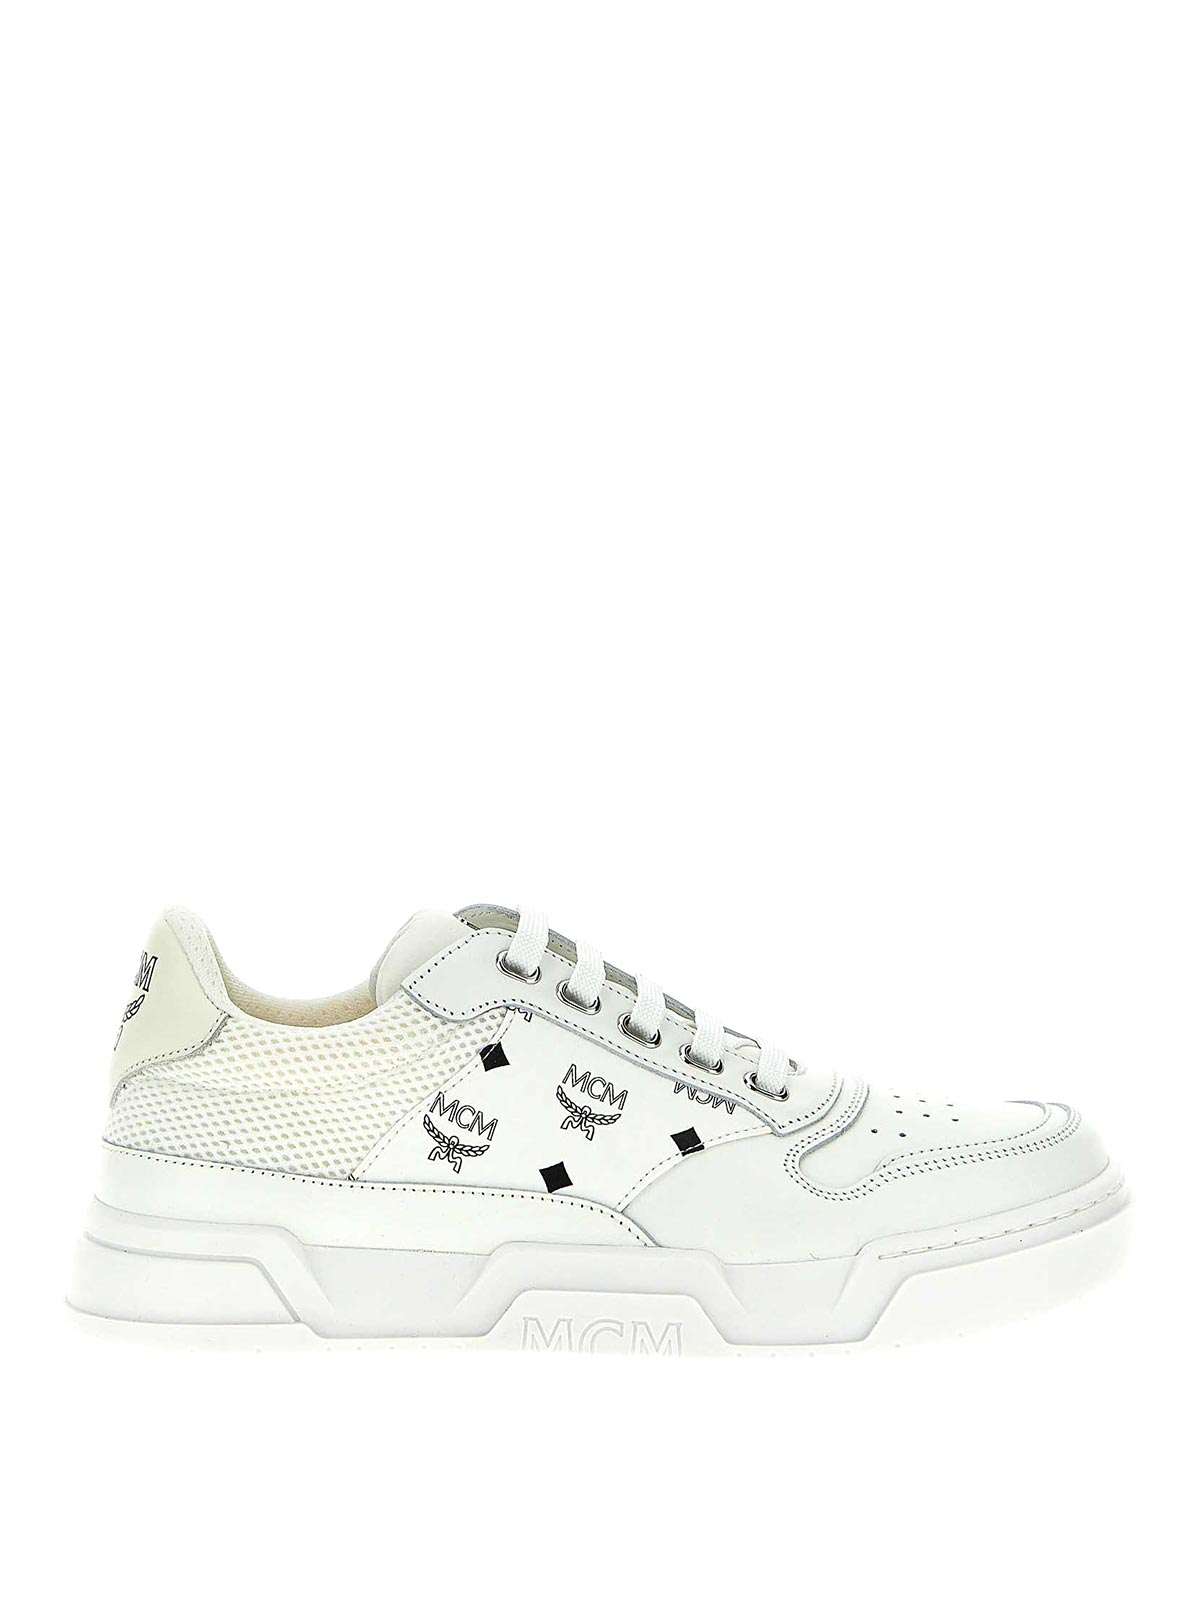 Mcm Skyward Trainers In White